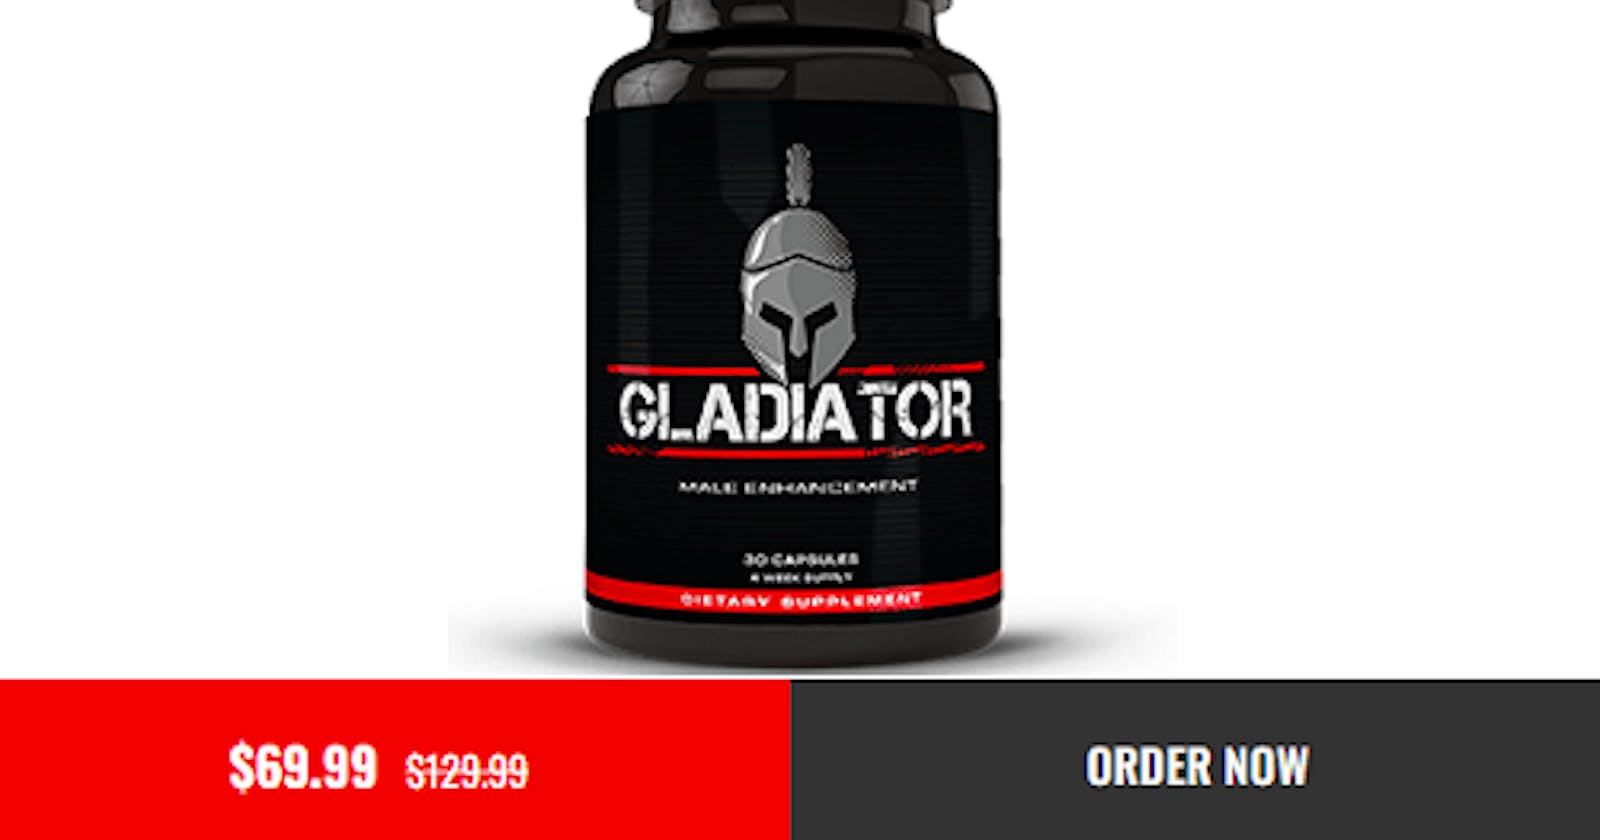 Gladiator Male Enhancement Review – Does This Product Work?